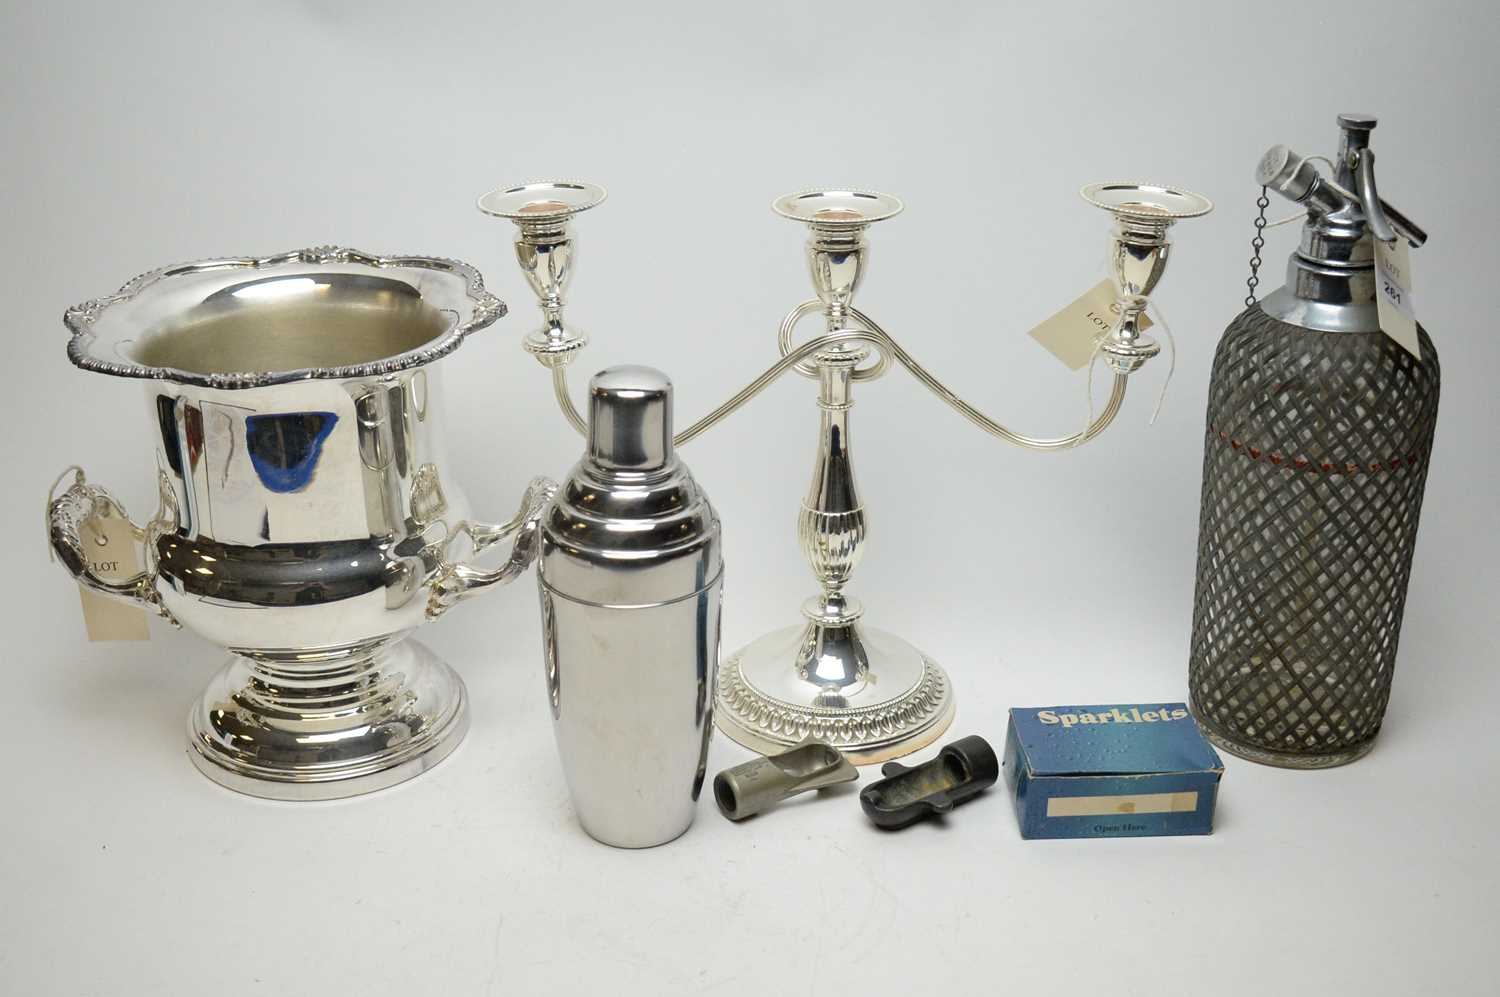 Vintage soda syphon; and other items.